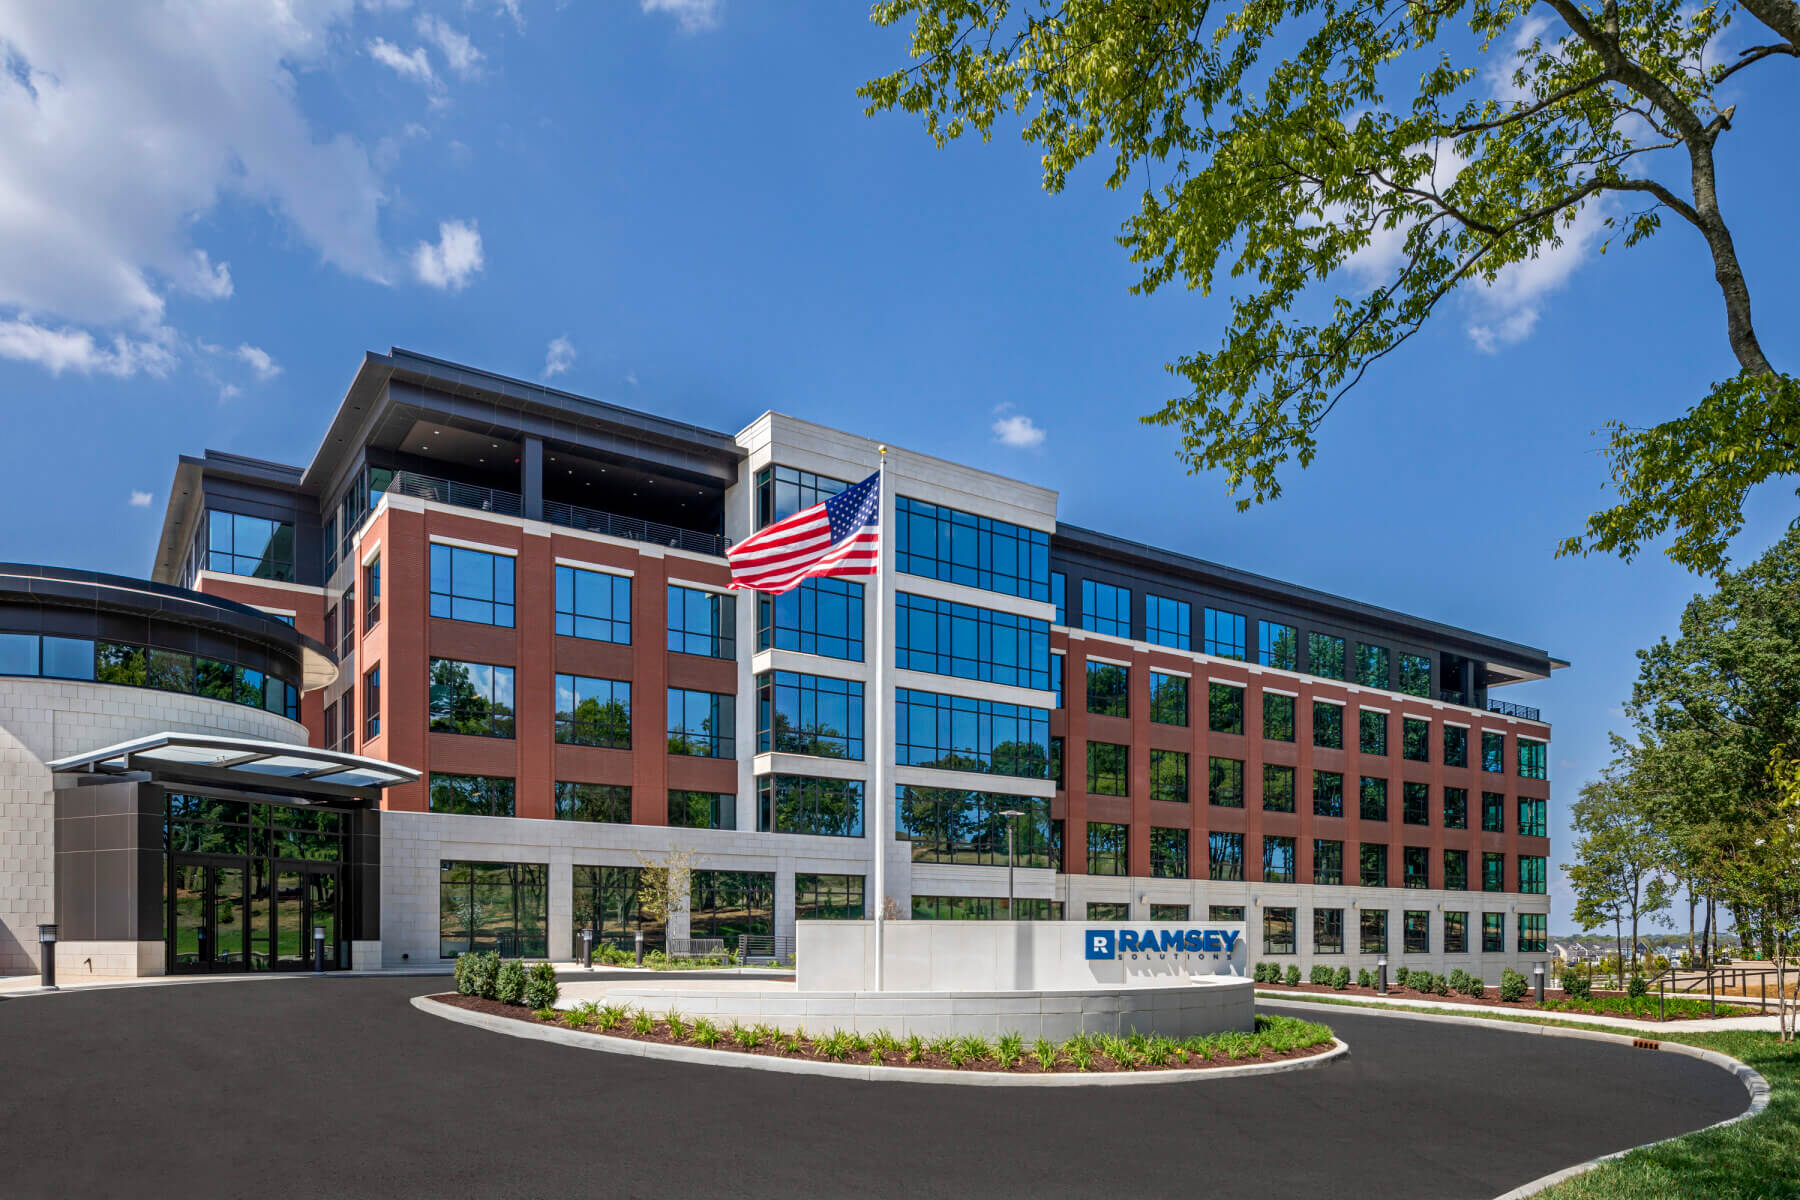 An exterior shot of the Ramsey Solutions headquarters building